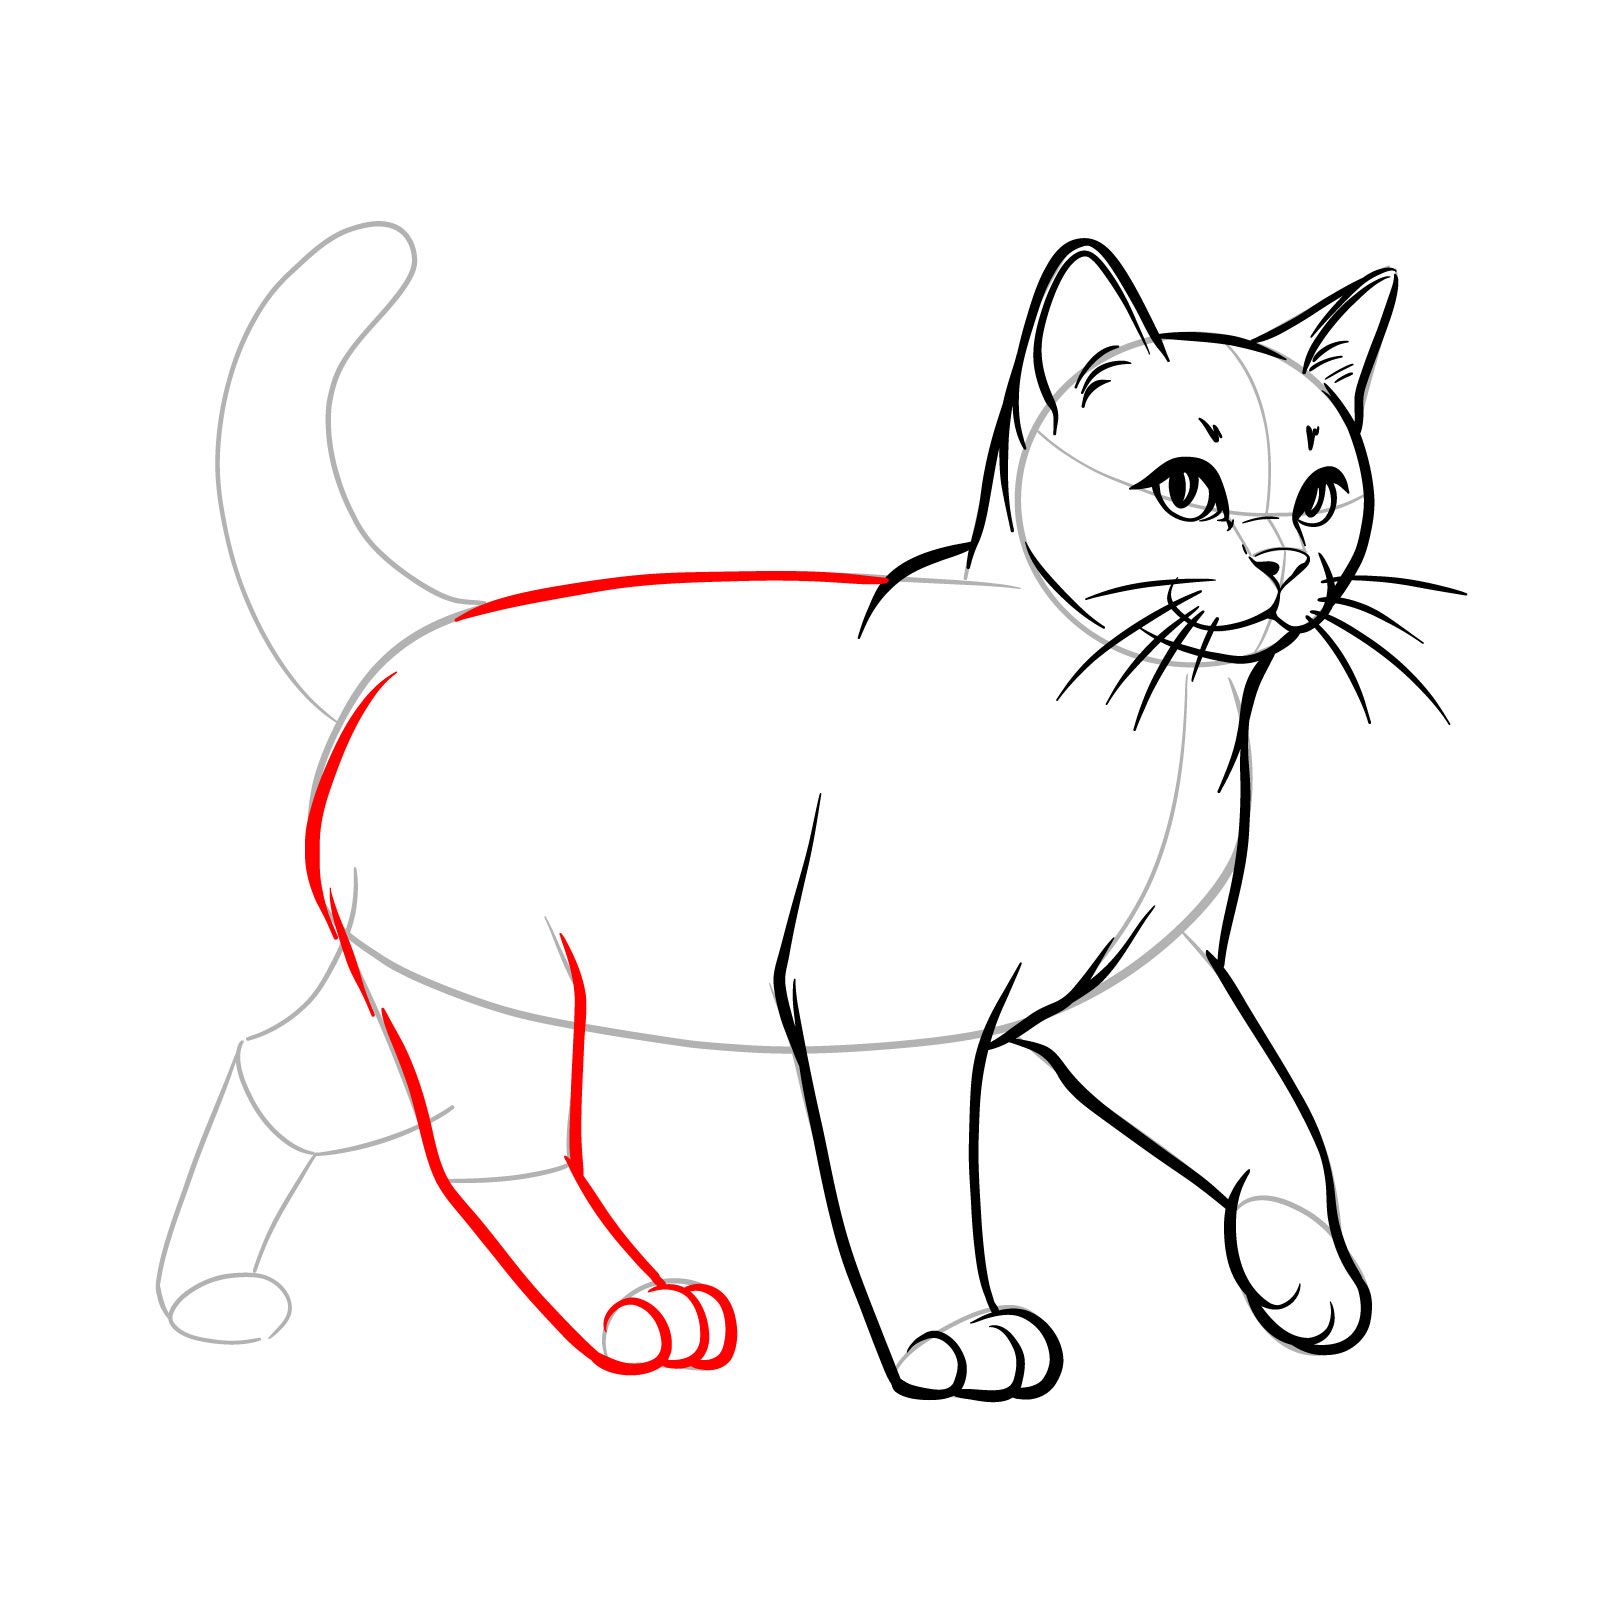 Drawing the cat's back and the rear leg to show the walking movement - step 11